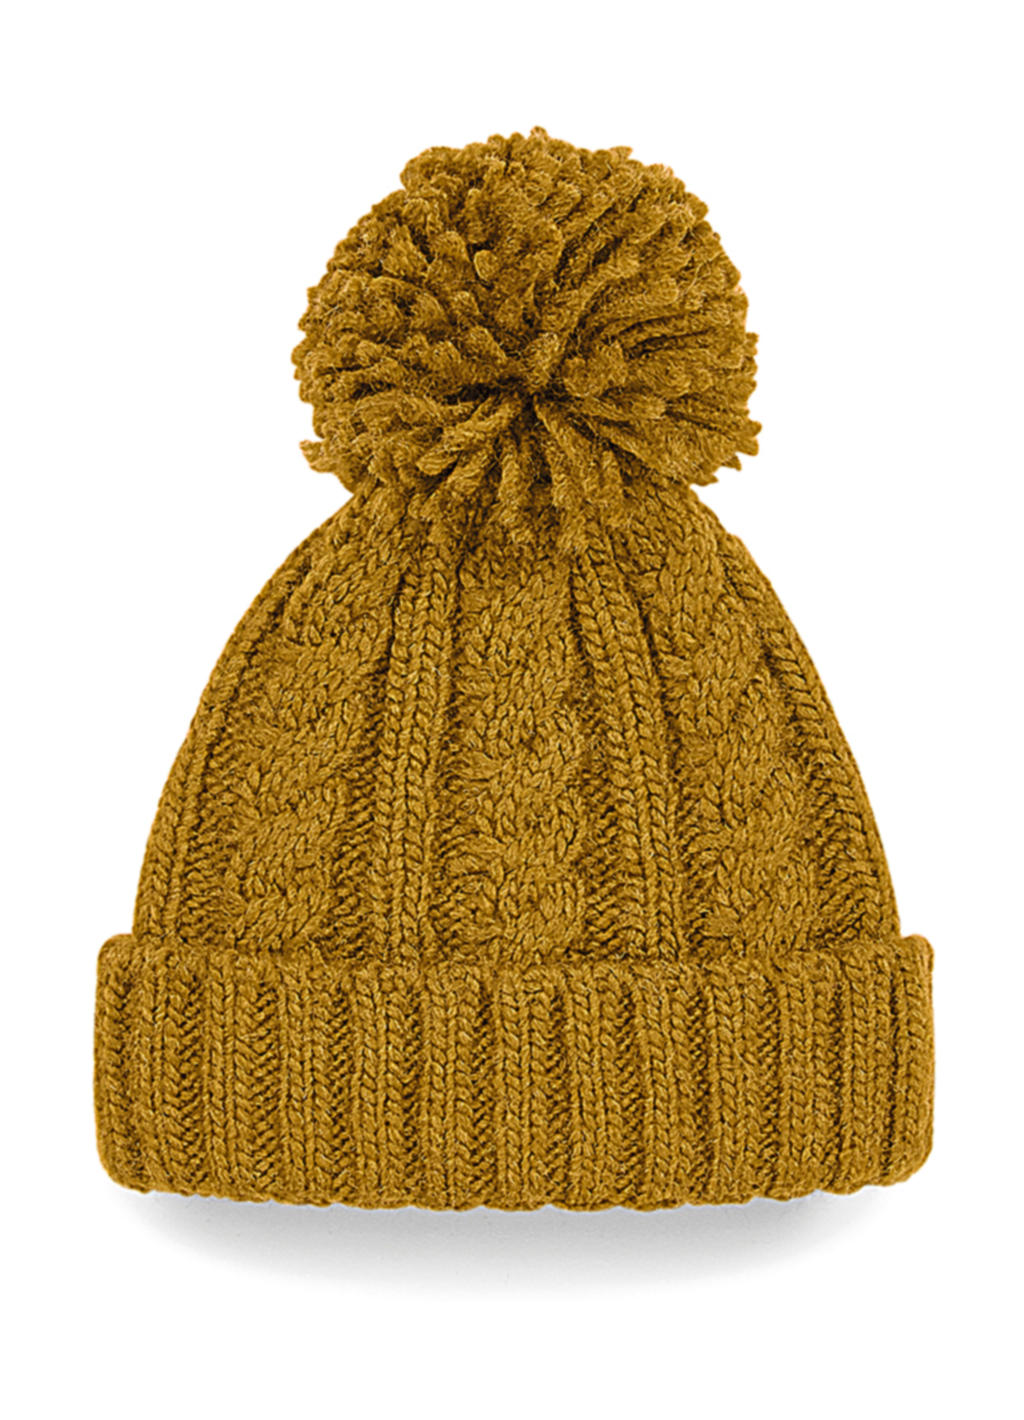  Cable Knit Melange Beanie in Farbe Mustard